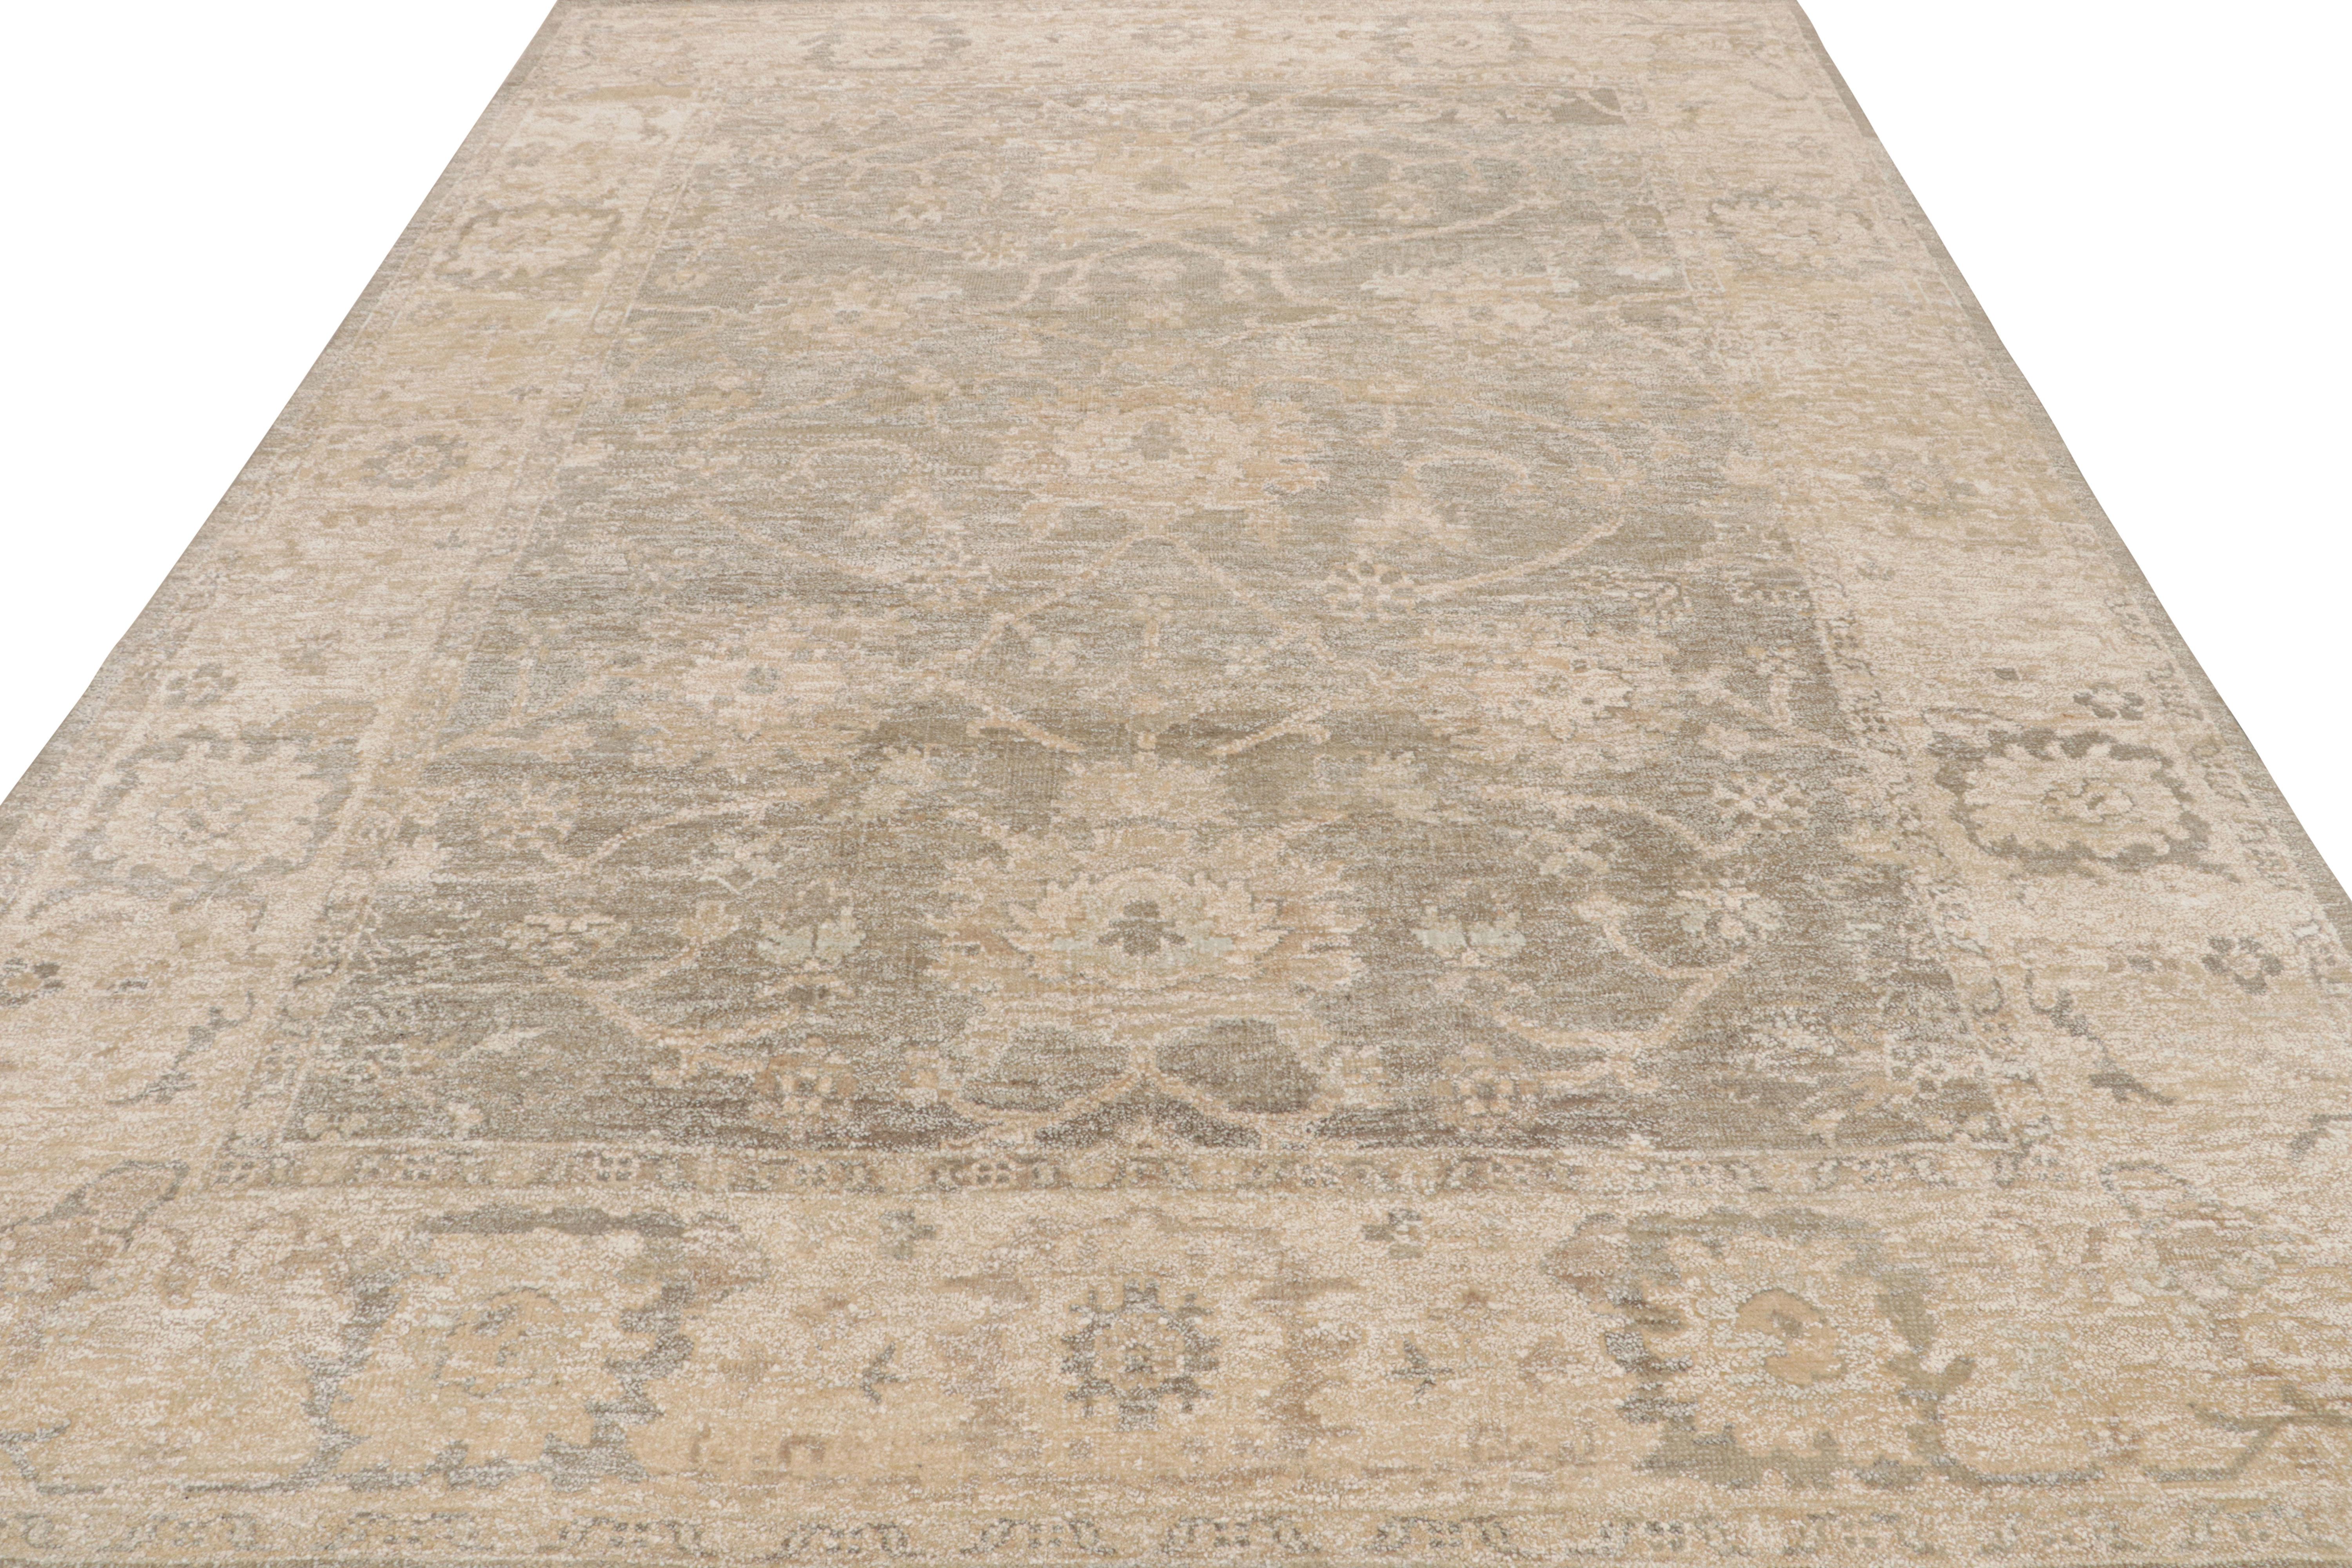 Indian Rug & Kilim’s Oushak Style Rug in Gray and Beige-Brown Floral Patterns For Sale